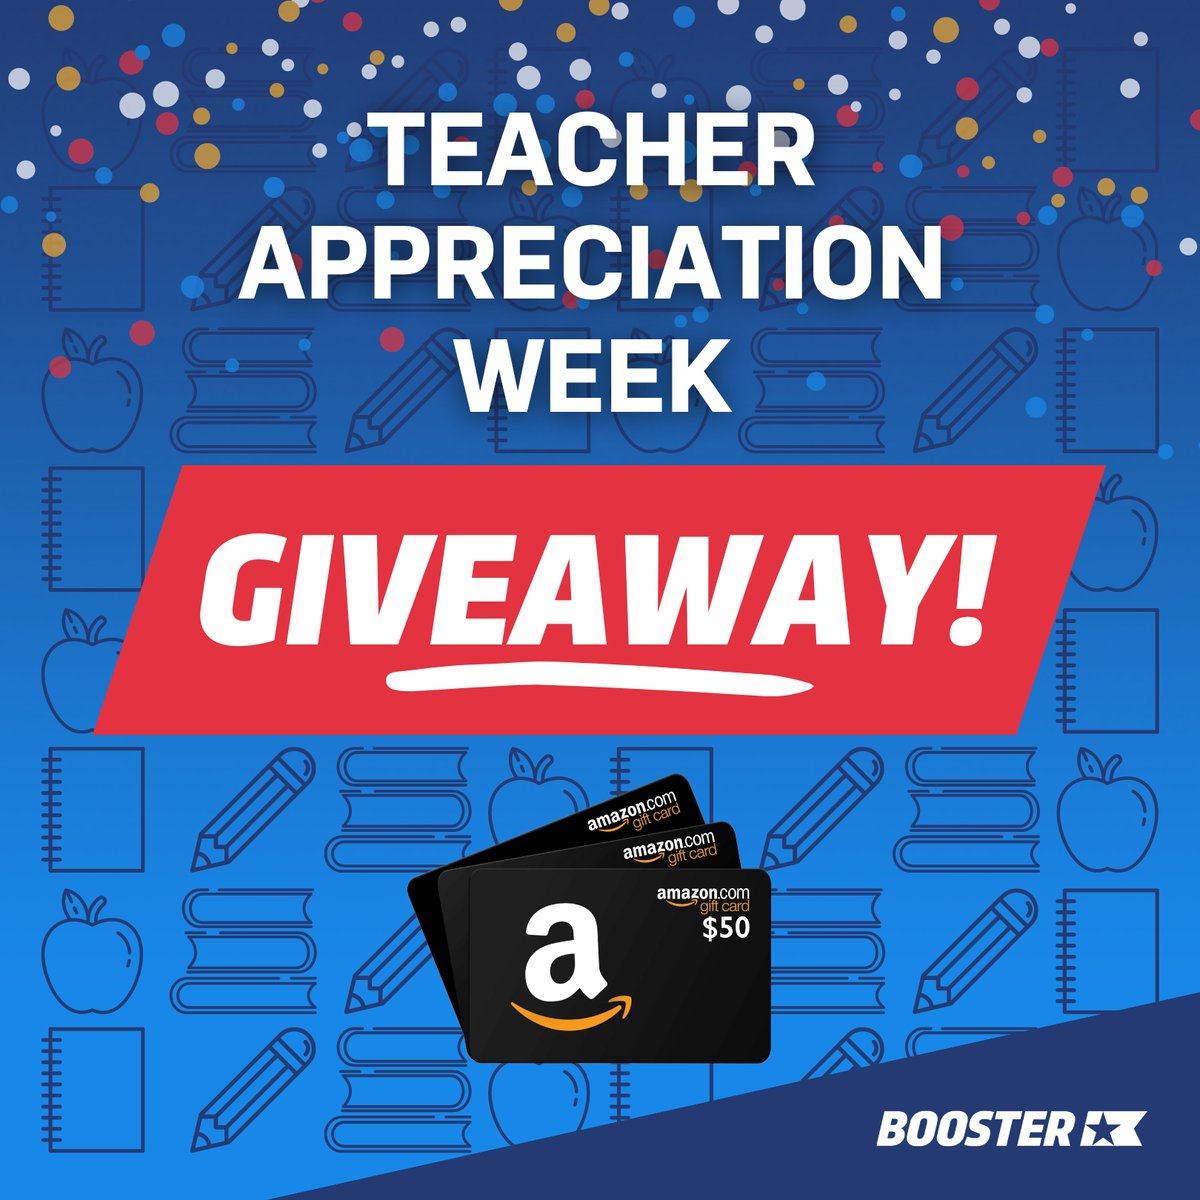 🎉 We're celebrating all of our amazing teachers with a Teacher Appreciation Week GIVEAWAY! 🎉 Reply and tag a teacher for their chance to win one of three $50 Amazon gift cards! And make sure you're following @choosebooster. Giveaway rules: bit.ly/3QziIyL.